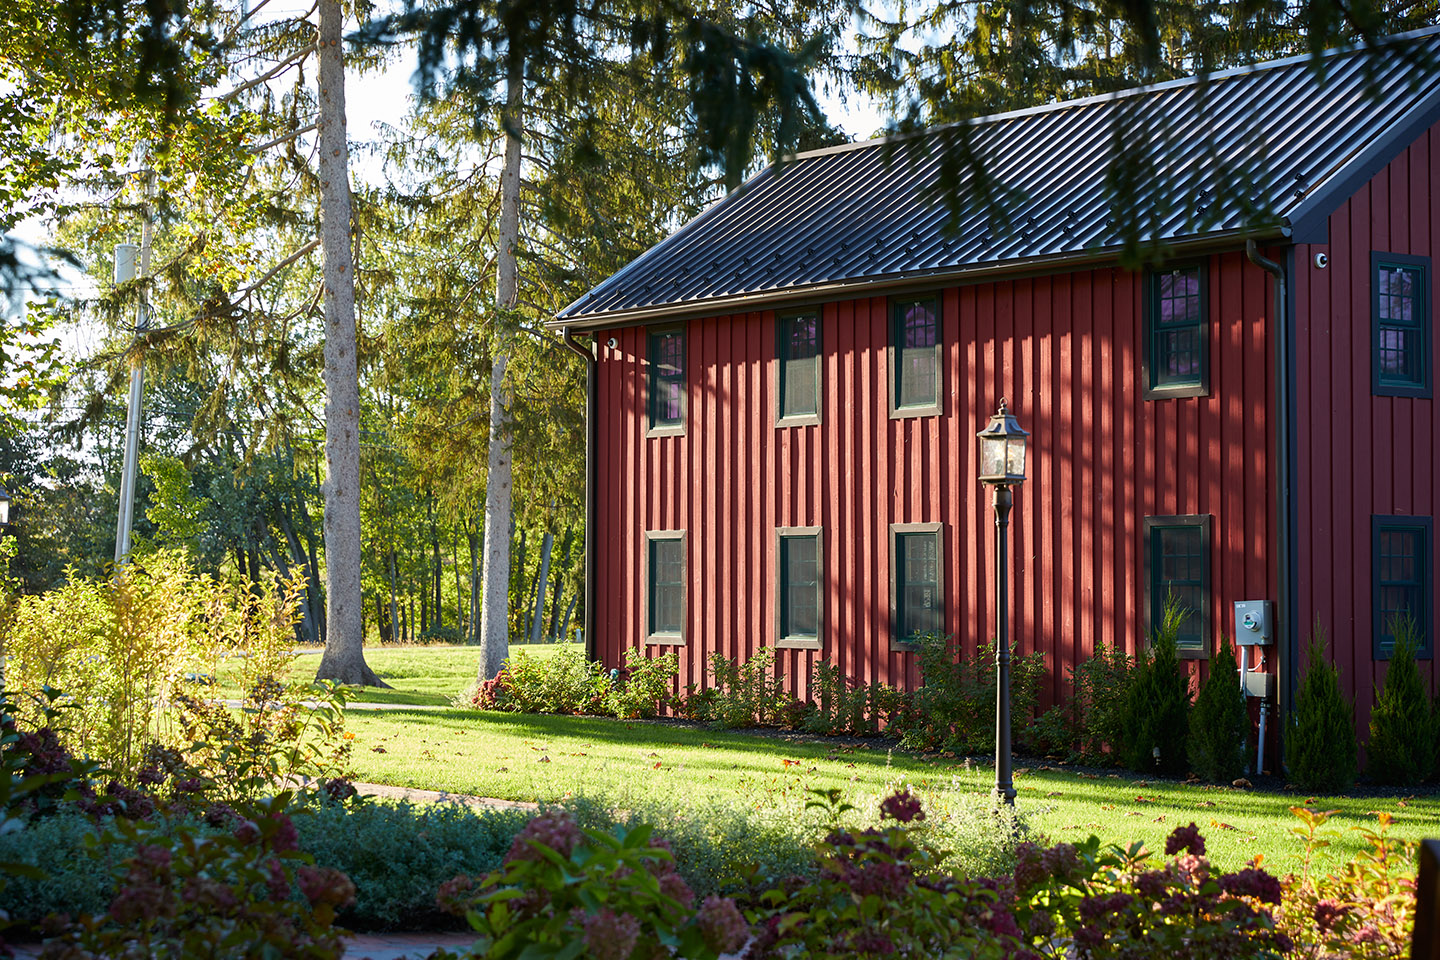 The Red Barn at Old Stone Inn Exteriors